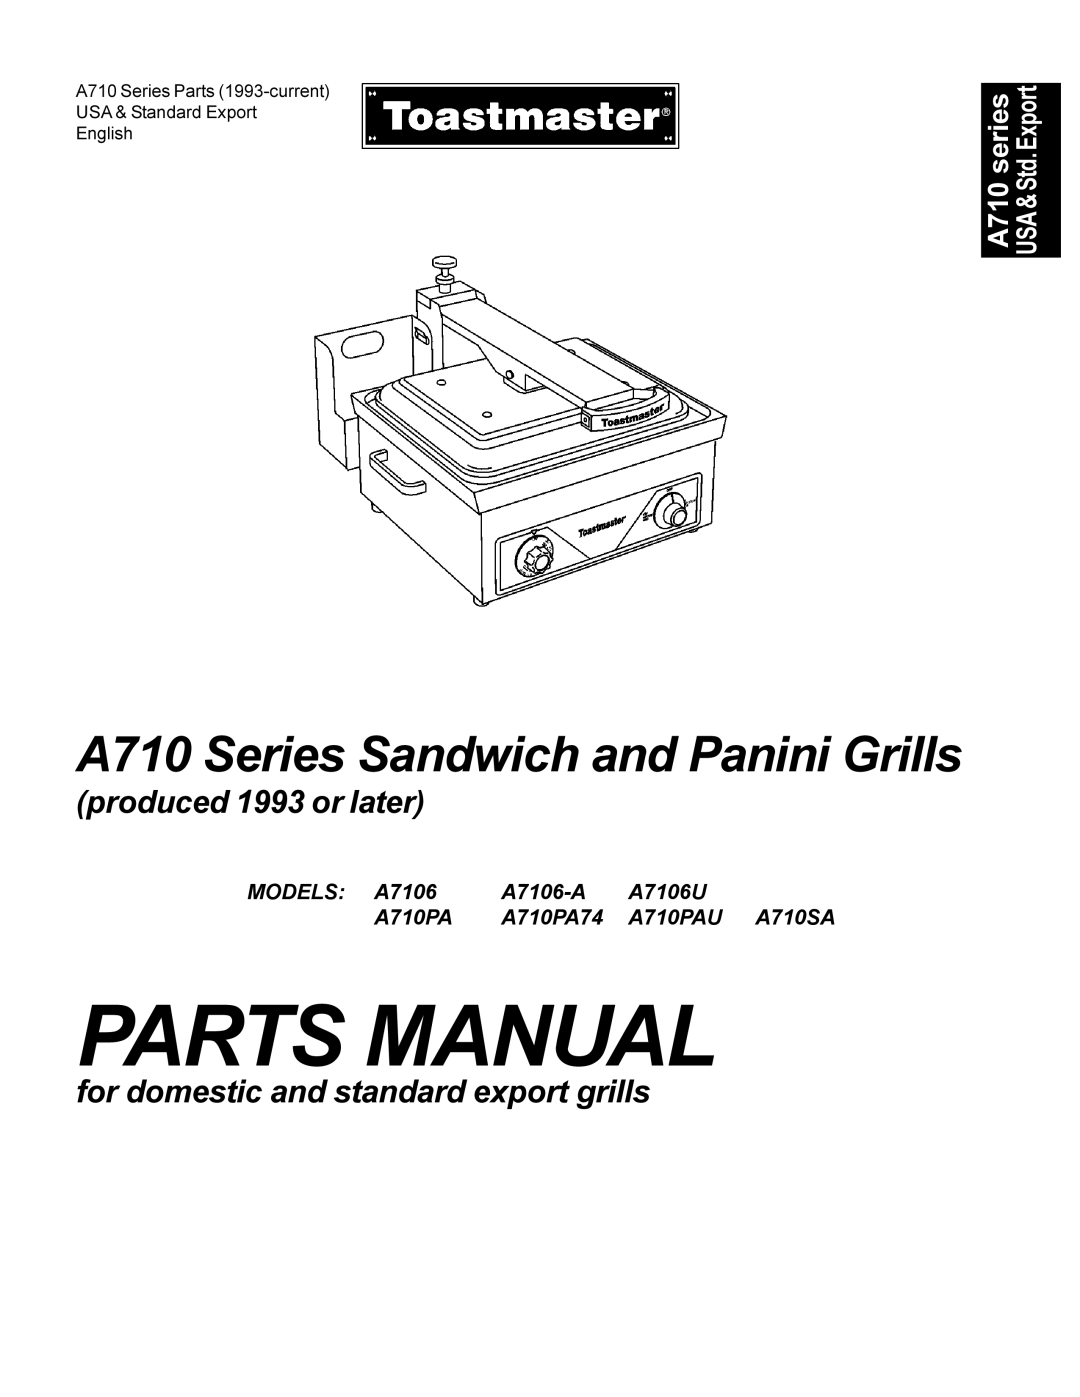 Toastmaster dimensions Sandwich and Panini Grills, Standard Features, Models A710, A710SA & A710PA, A710SA674, A710674 